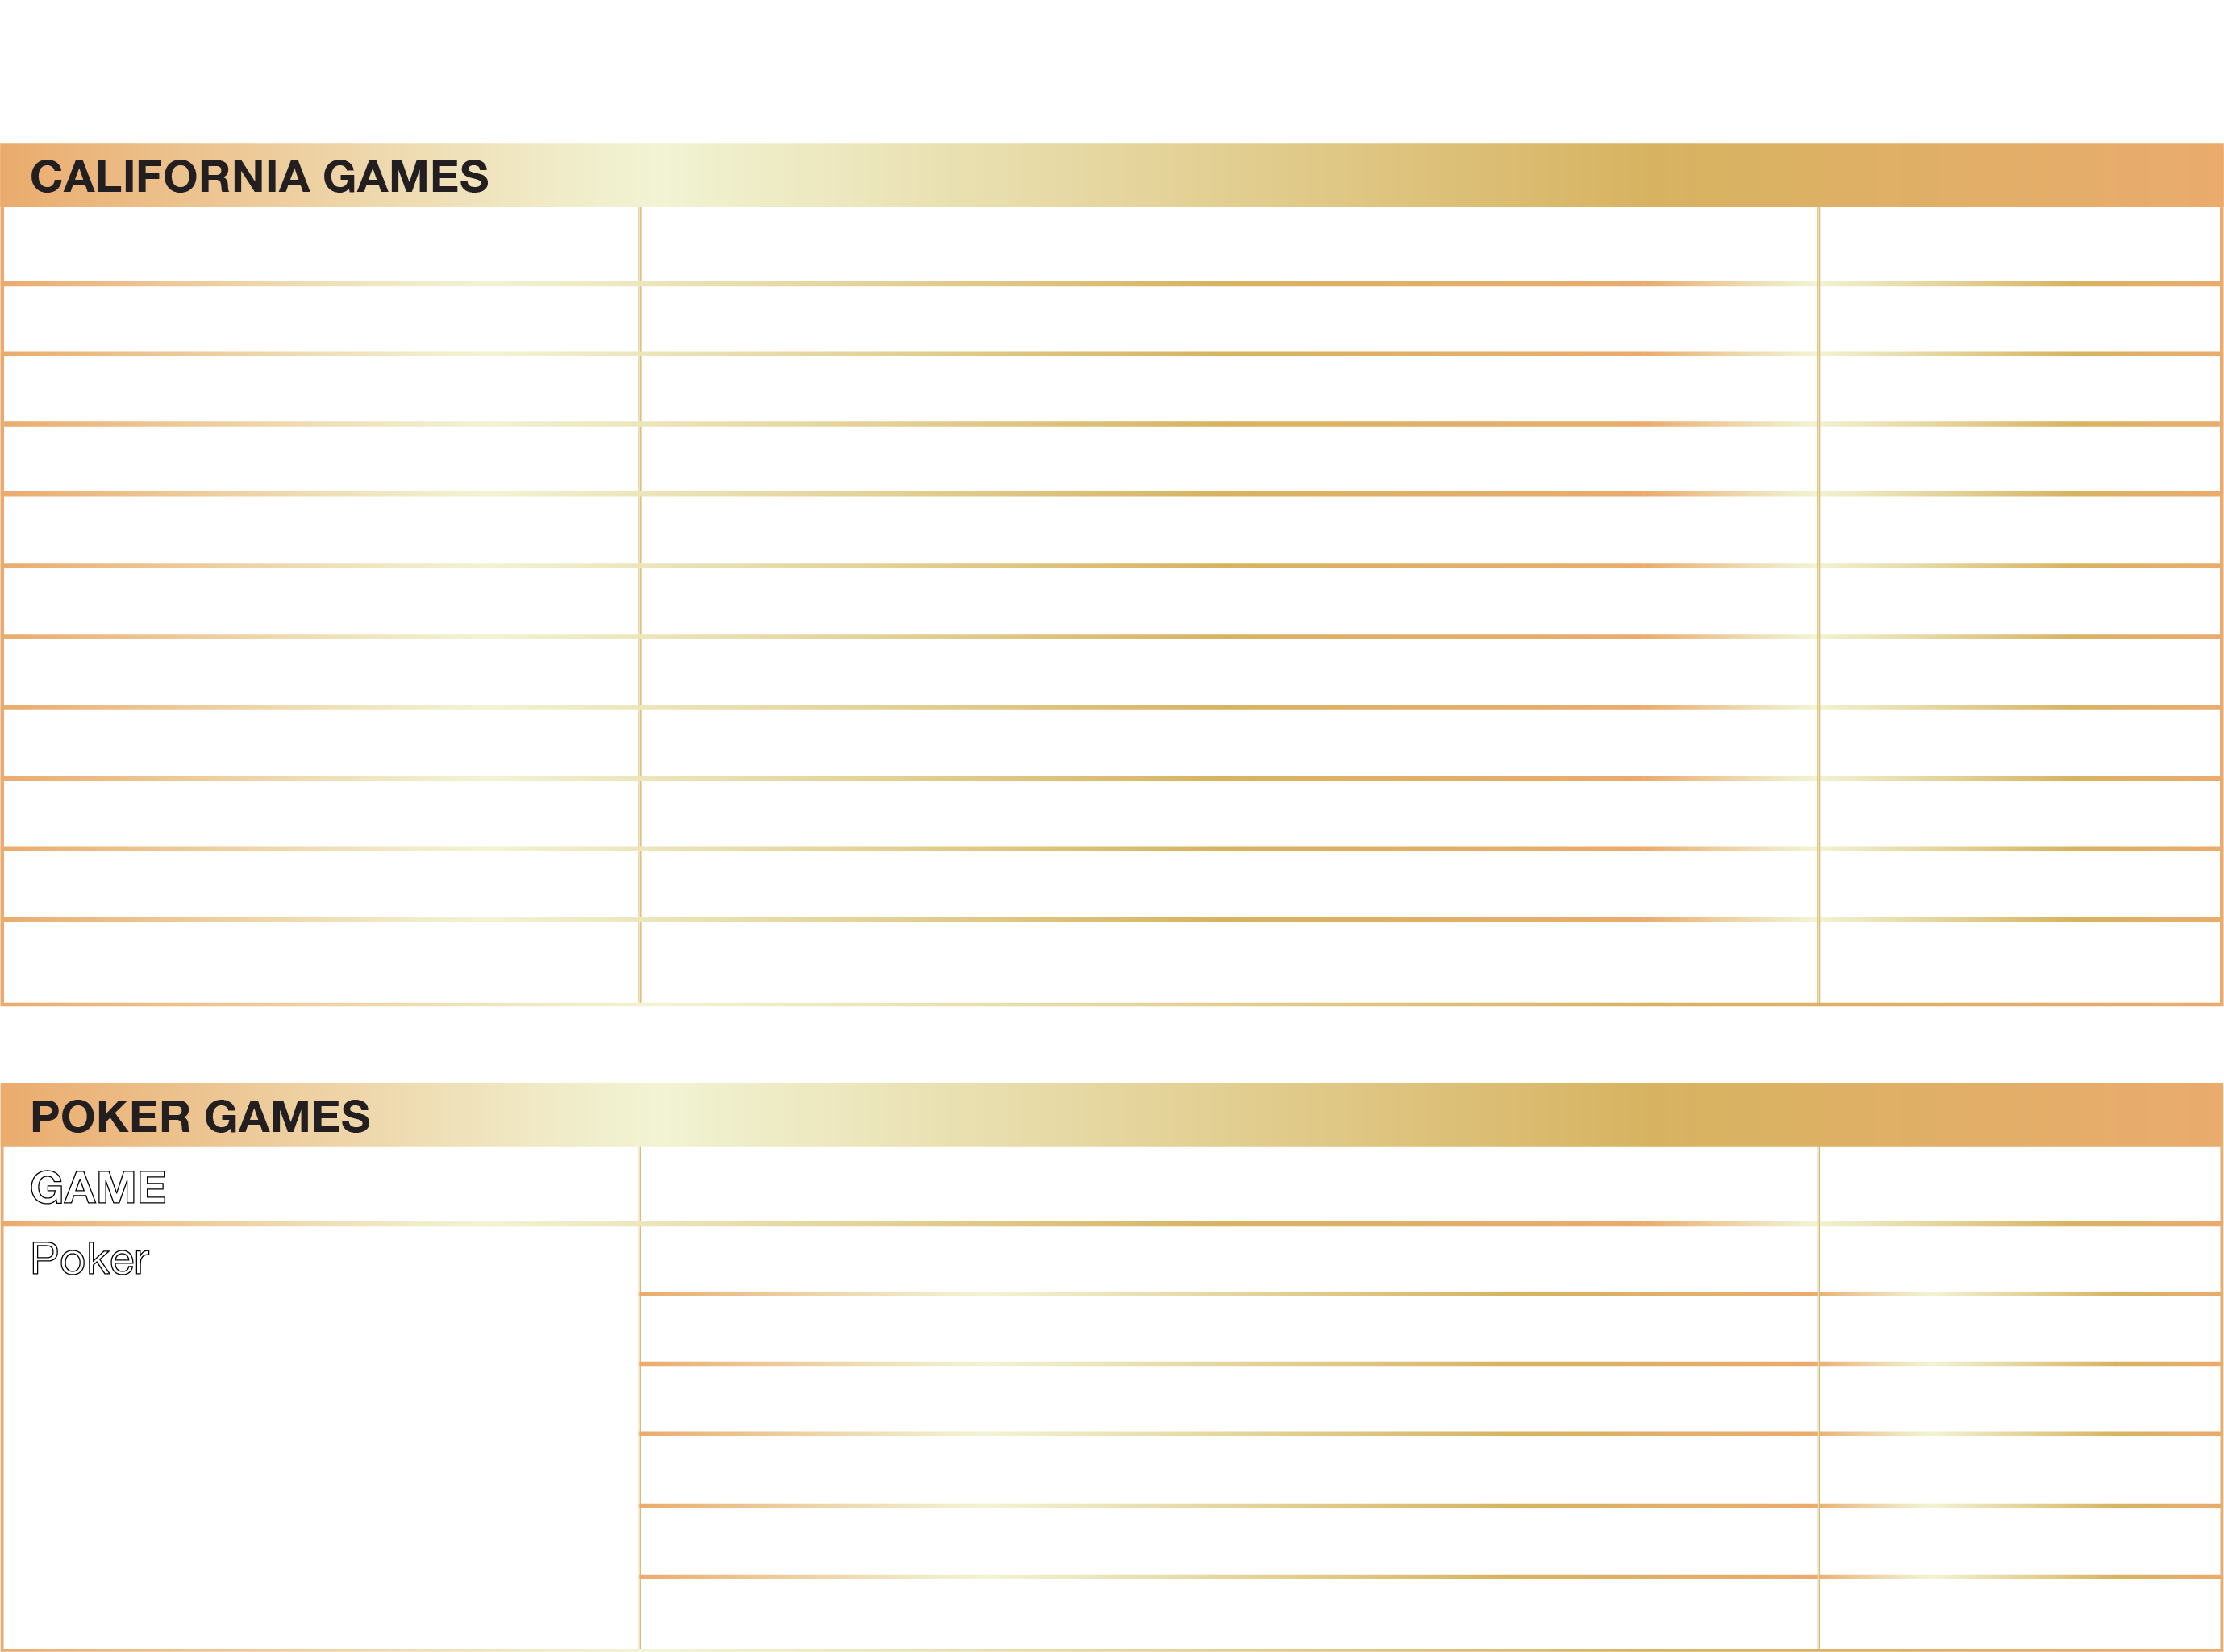 Qualifying Hands and Prize Payout